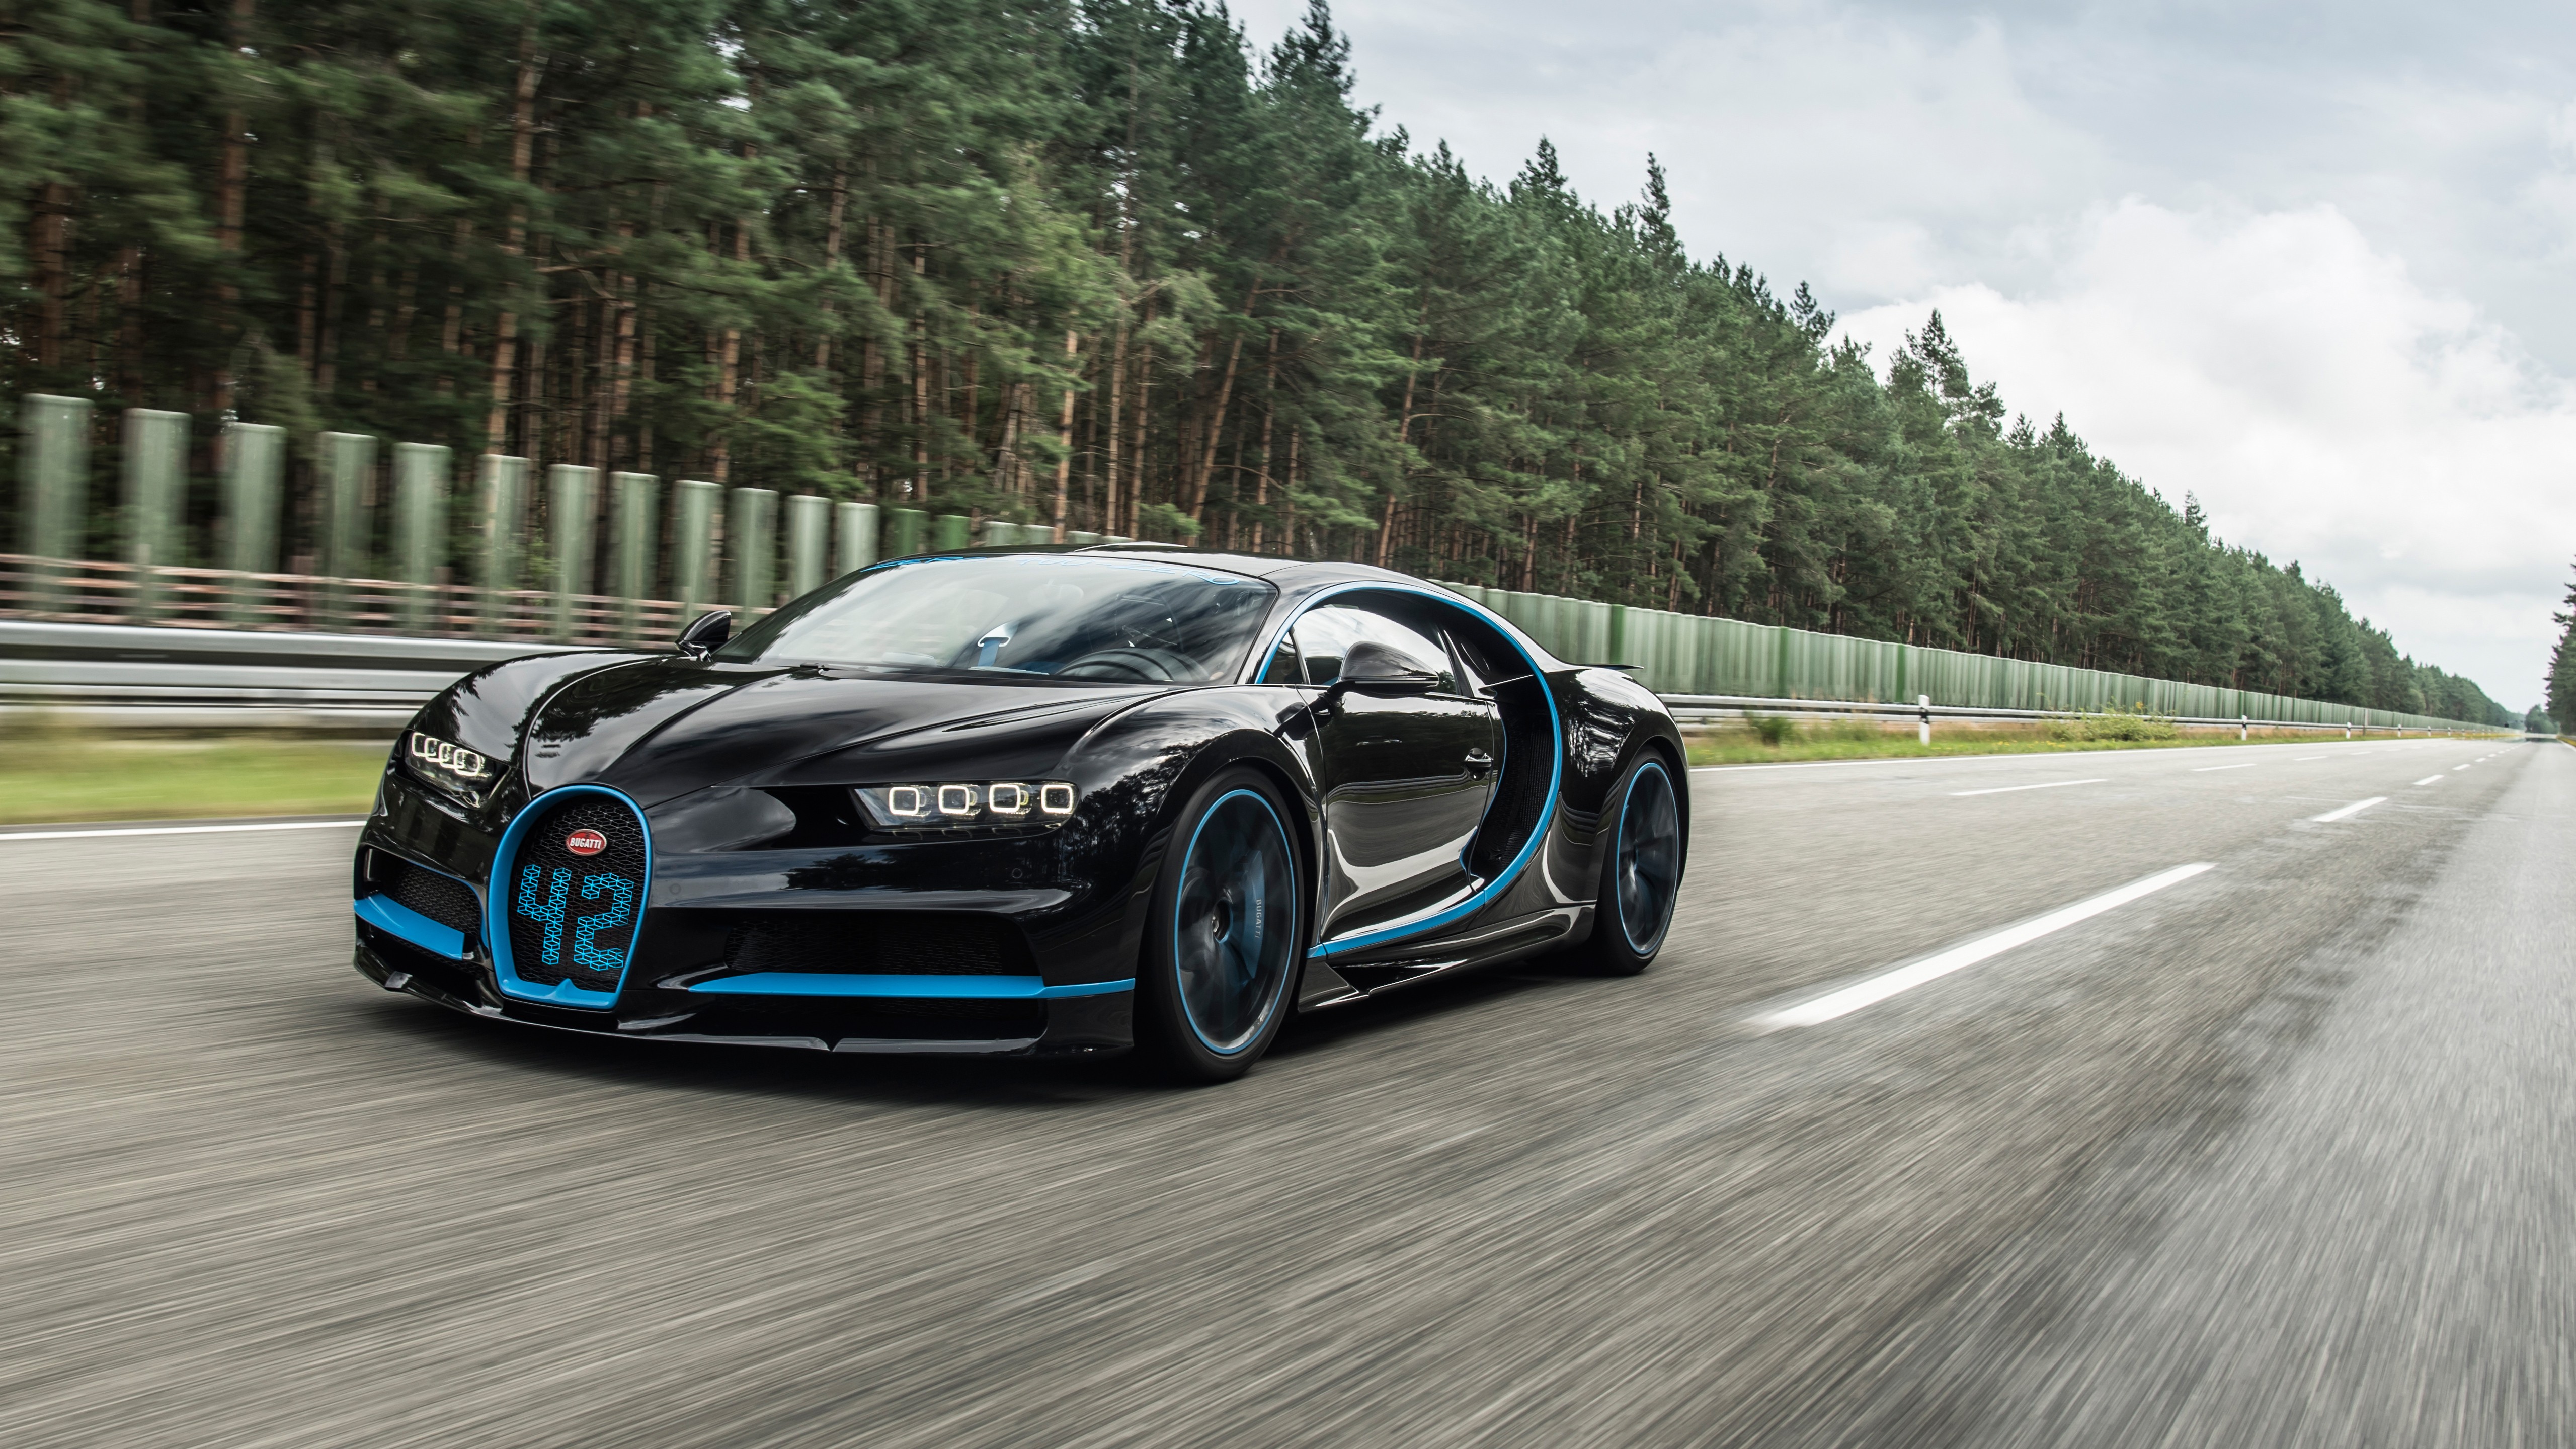 General 5120x2880 car Bugatti Chiron tracks Bugatti French Cars Volkswagen Group black cars Hypercar frontal view headlights trees driving sky clouds road